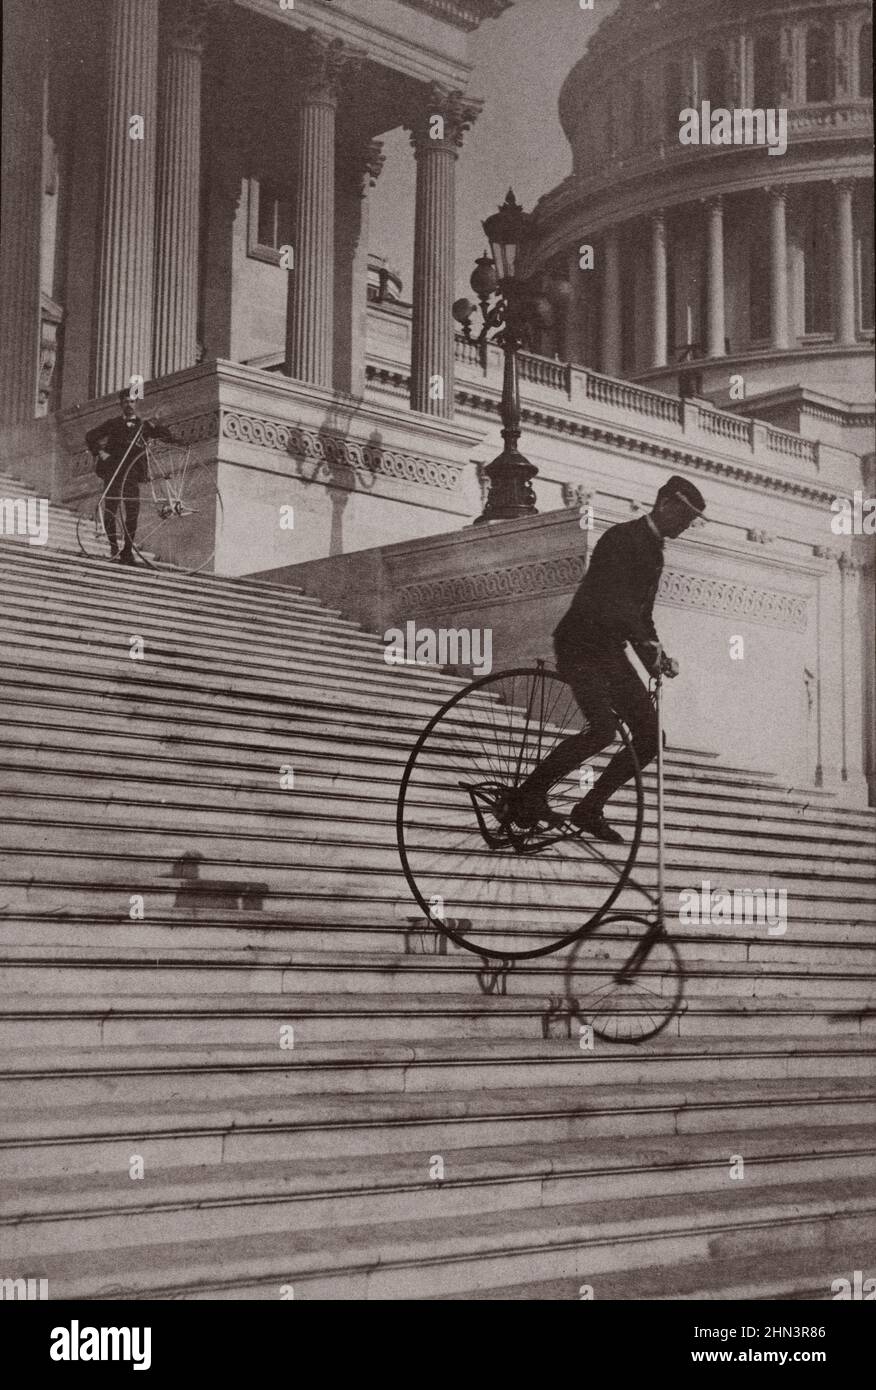 Vintage photograph shows a man riding a bicycle down the steps of the U.S. Capitol as another man with a bicycle waits at the top. 1884 Stock Photo